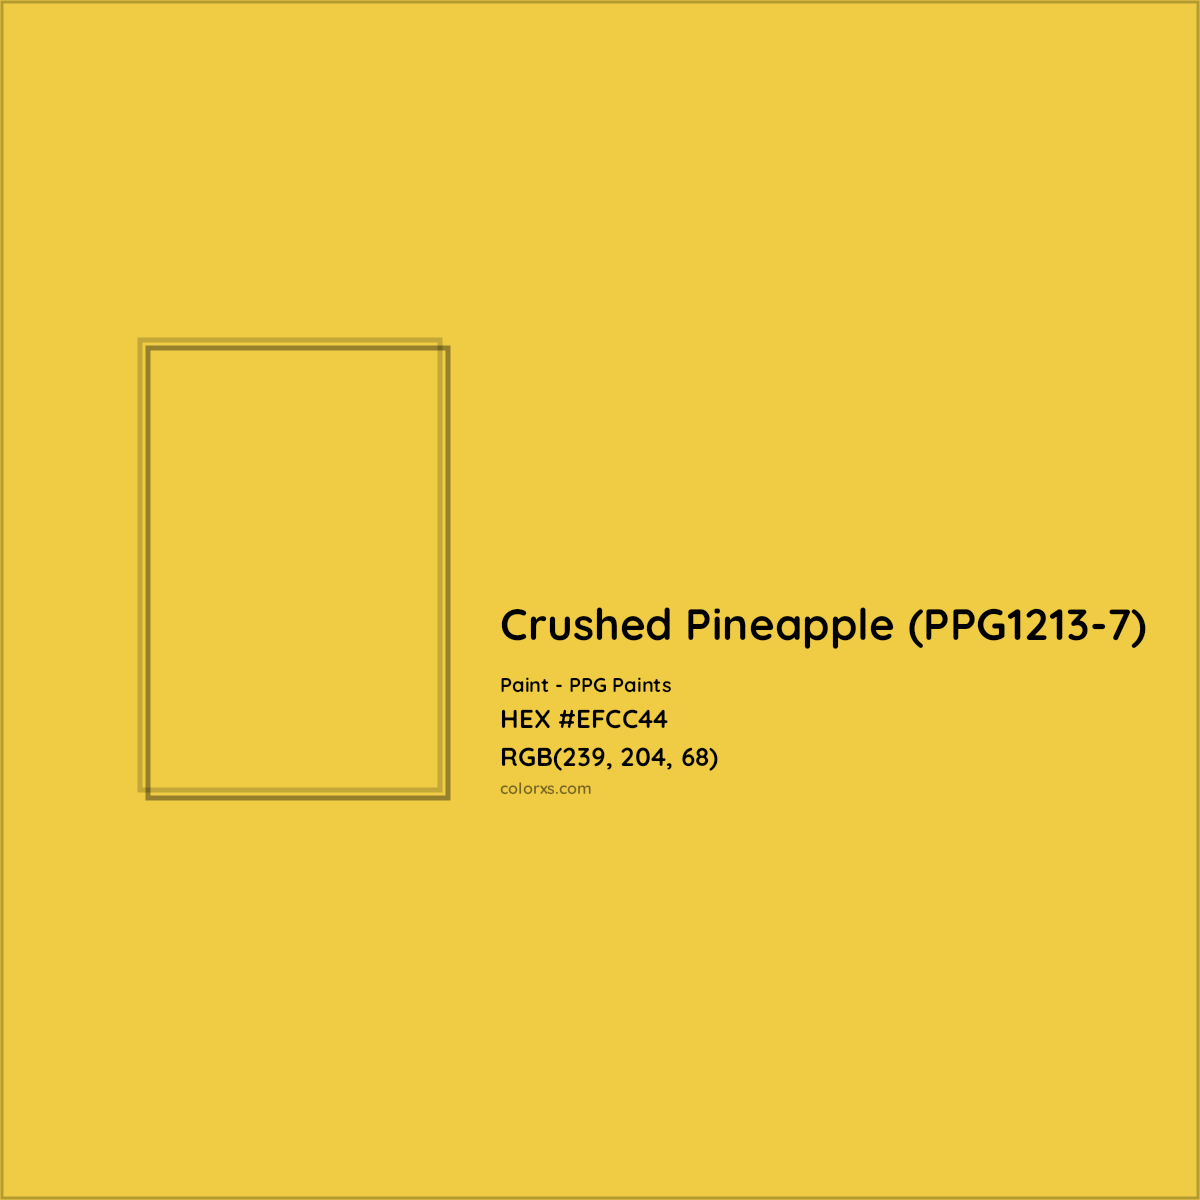 HEX #EFCC44 Crushed Pineapple (PPG1213-7) Paint PPG Paints - Color Code